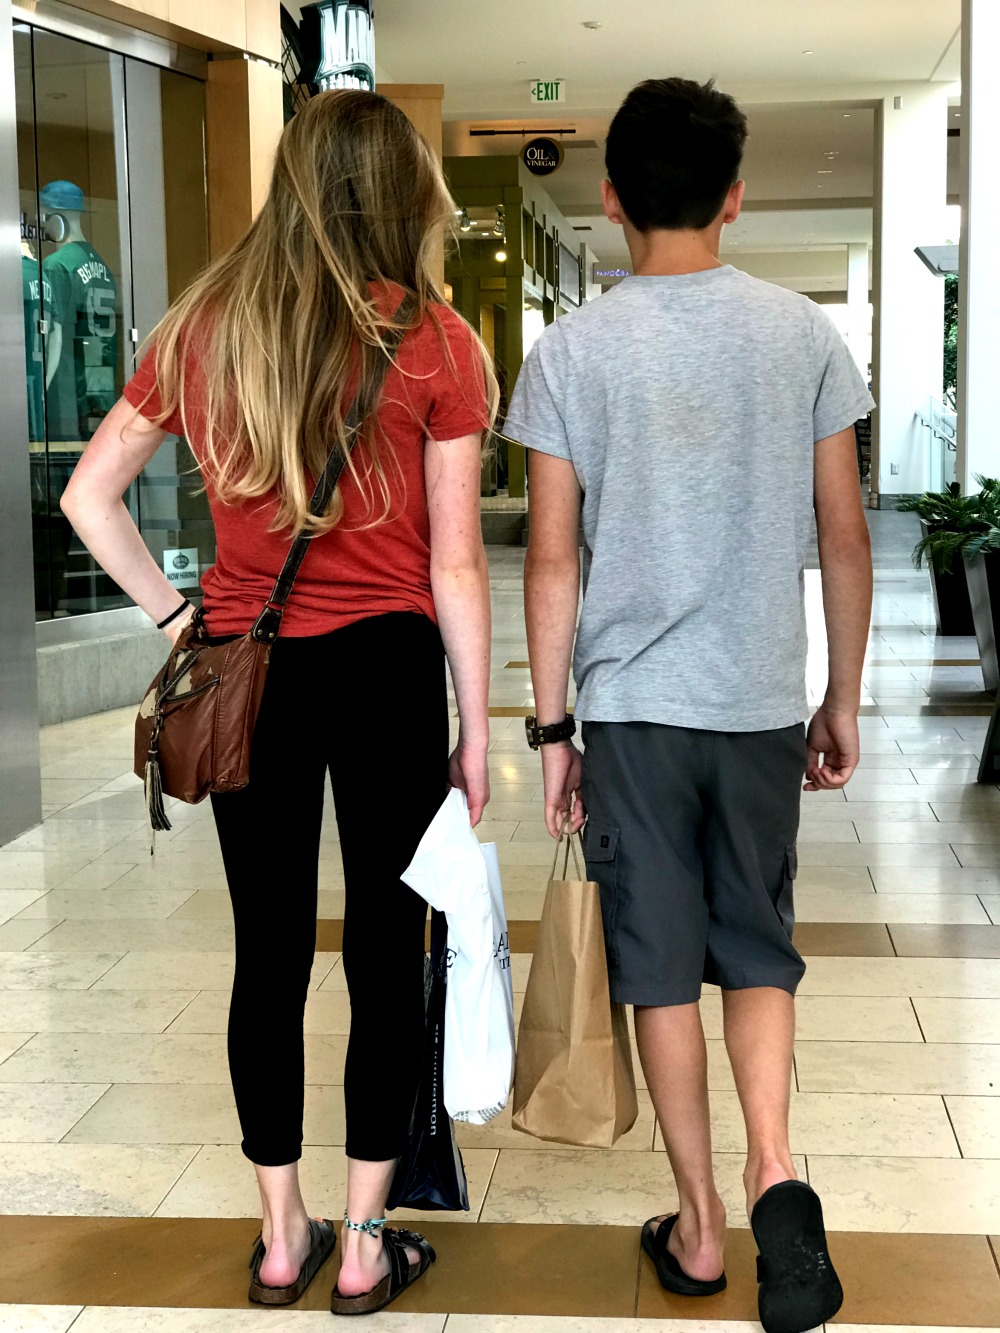 mall shopping with teenagers